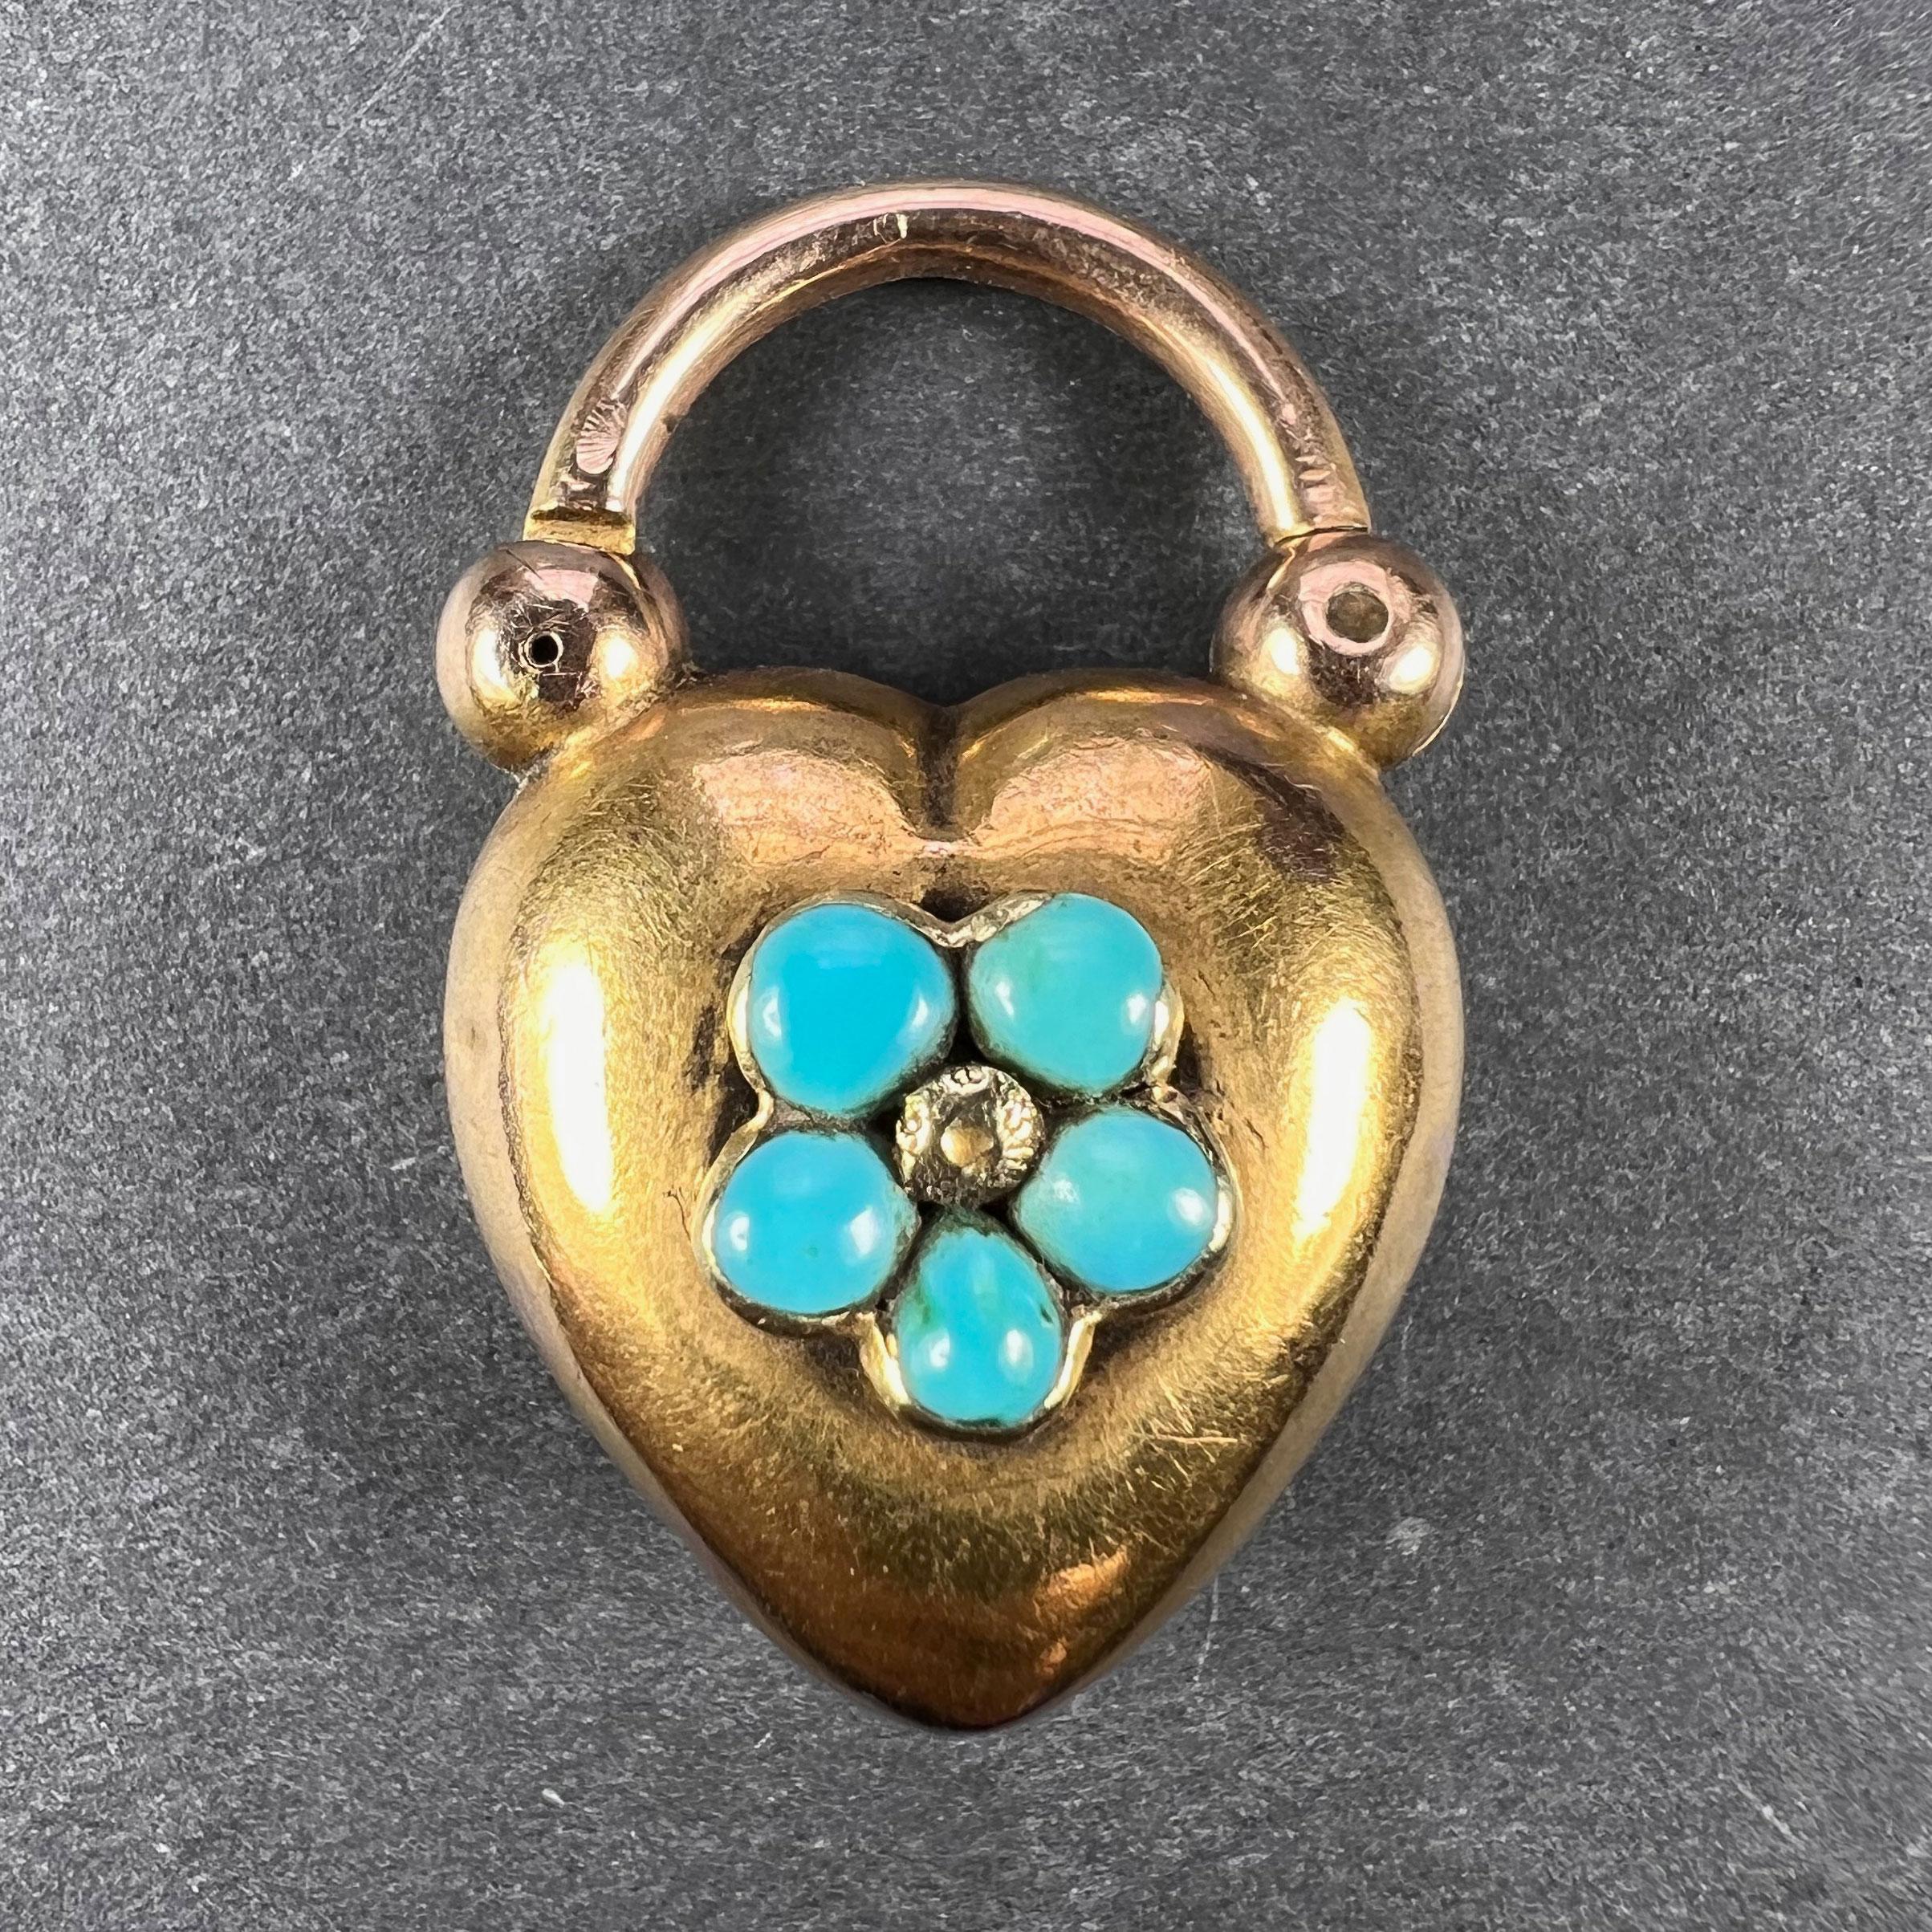 An Antique Victorian 15 karat (15K) yellow gold heart-shaped pendant mourning locket set with five turquoise cabochons in a flower design centring on a gold bead. The reverse set with a pear-shaped glass-fronted locket containing gold wire and other